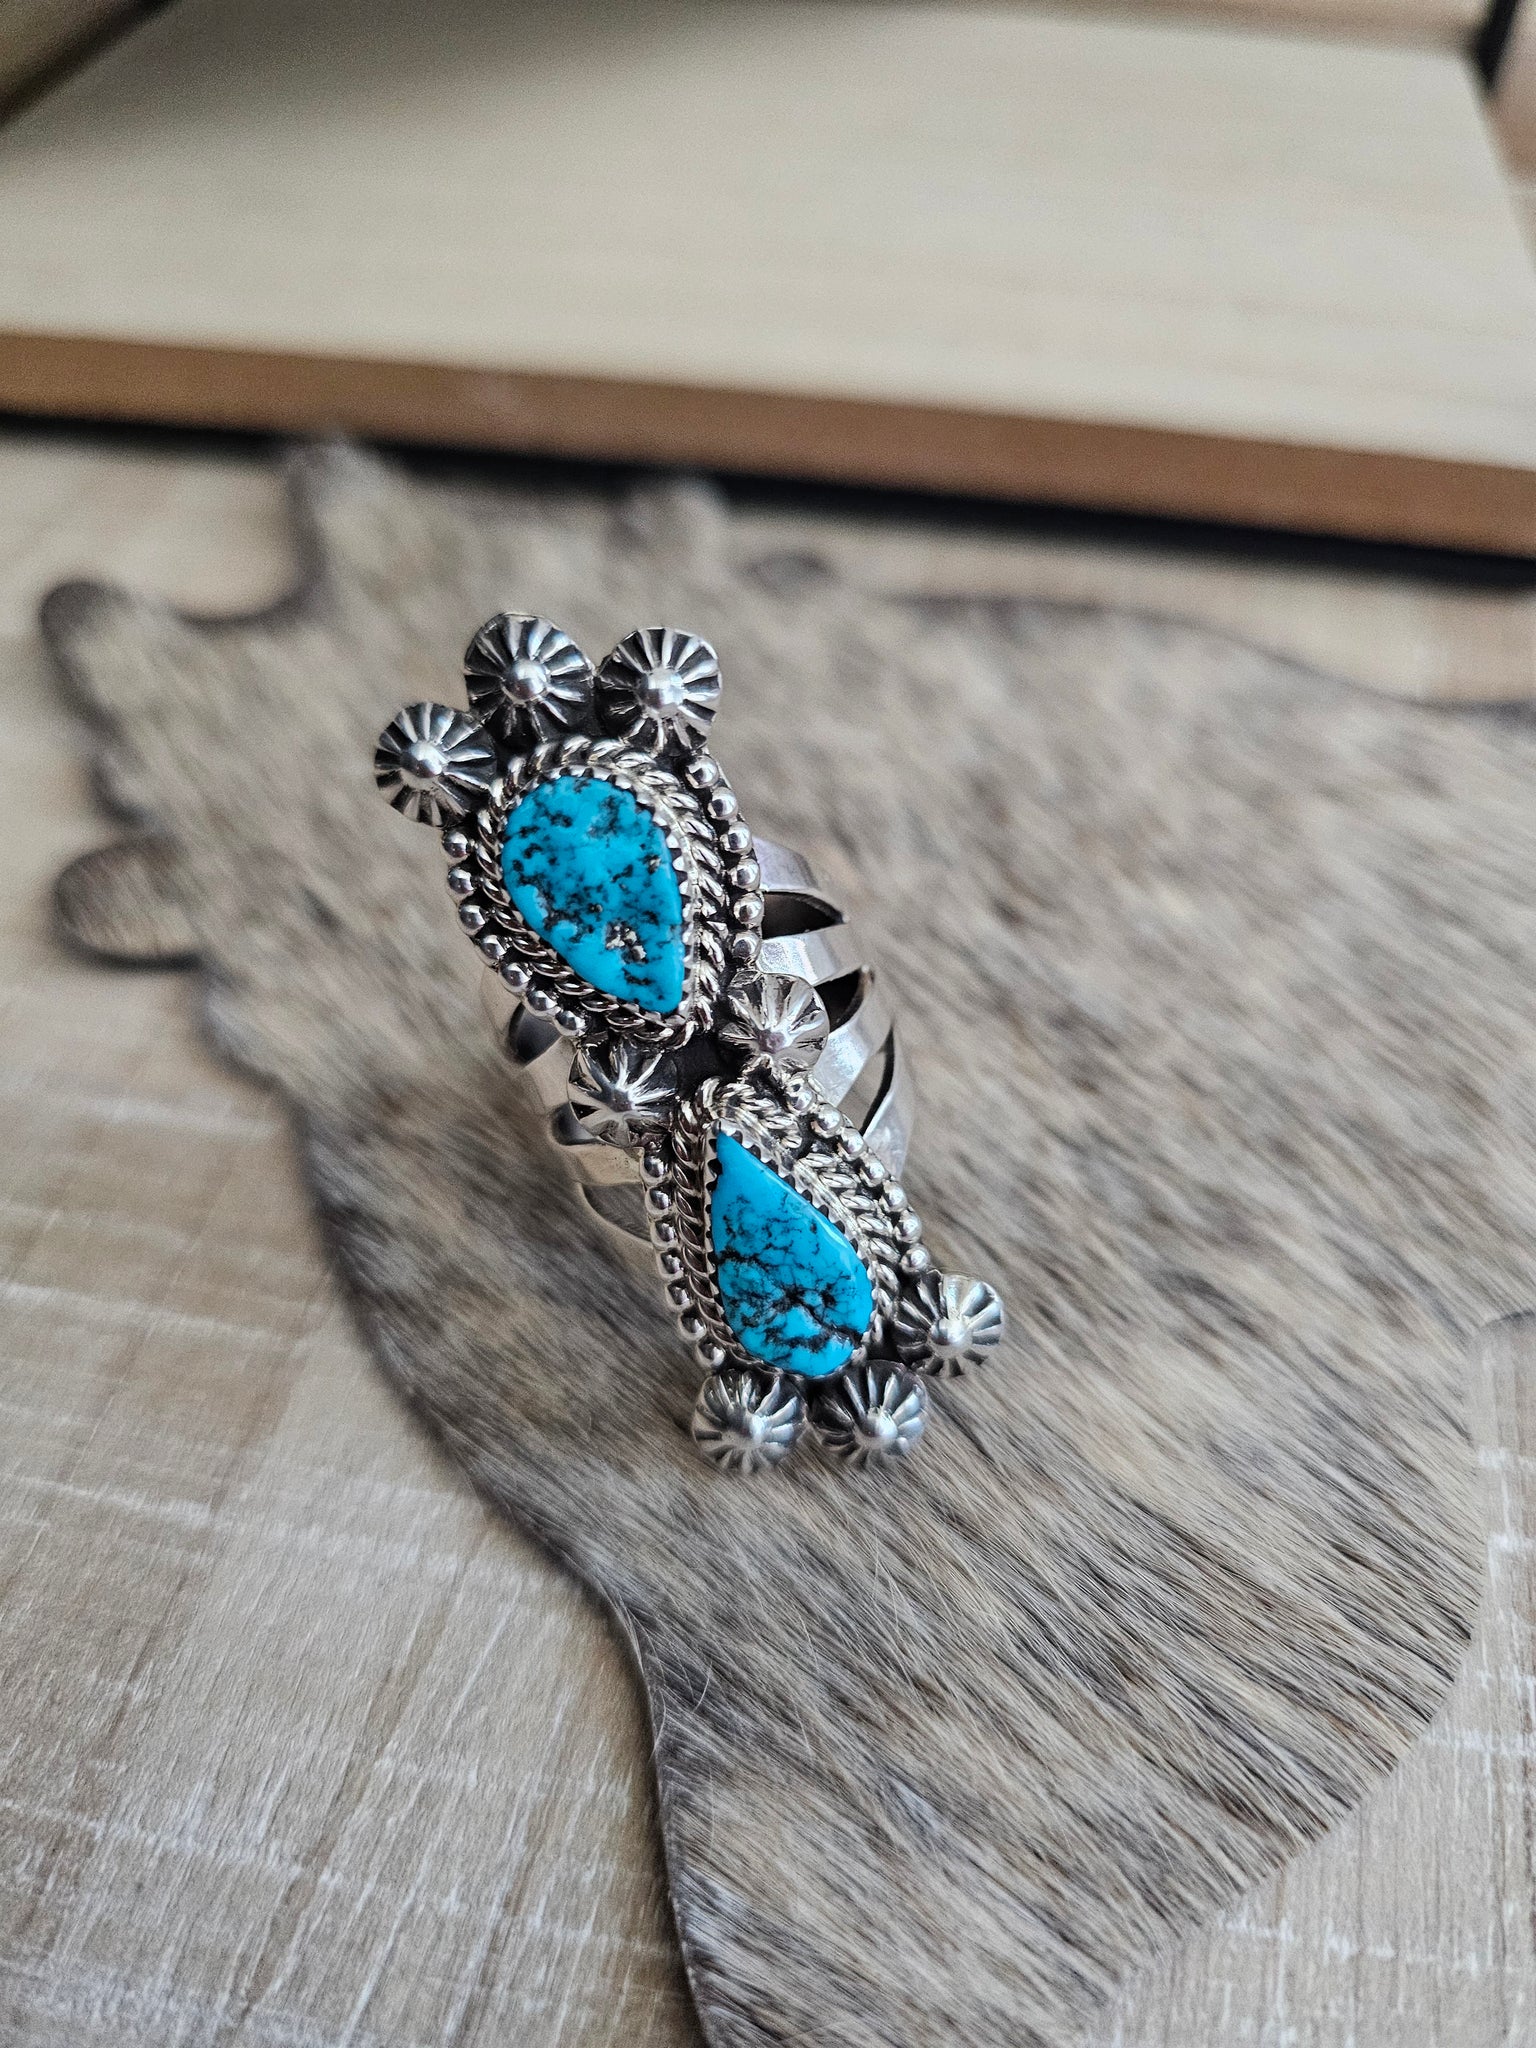 Unique Turquoise Gemstone Ring With Hidden Inner Chamber